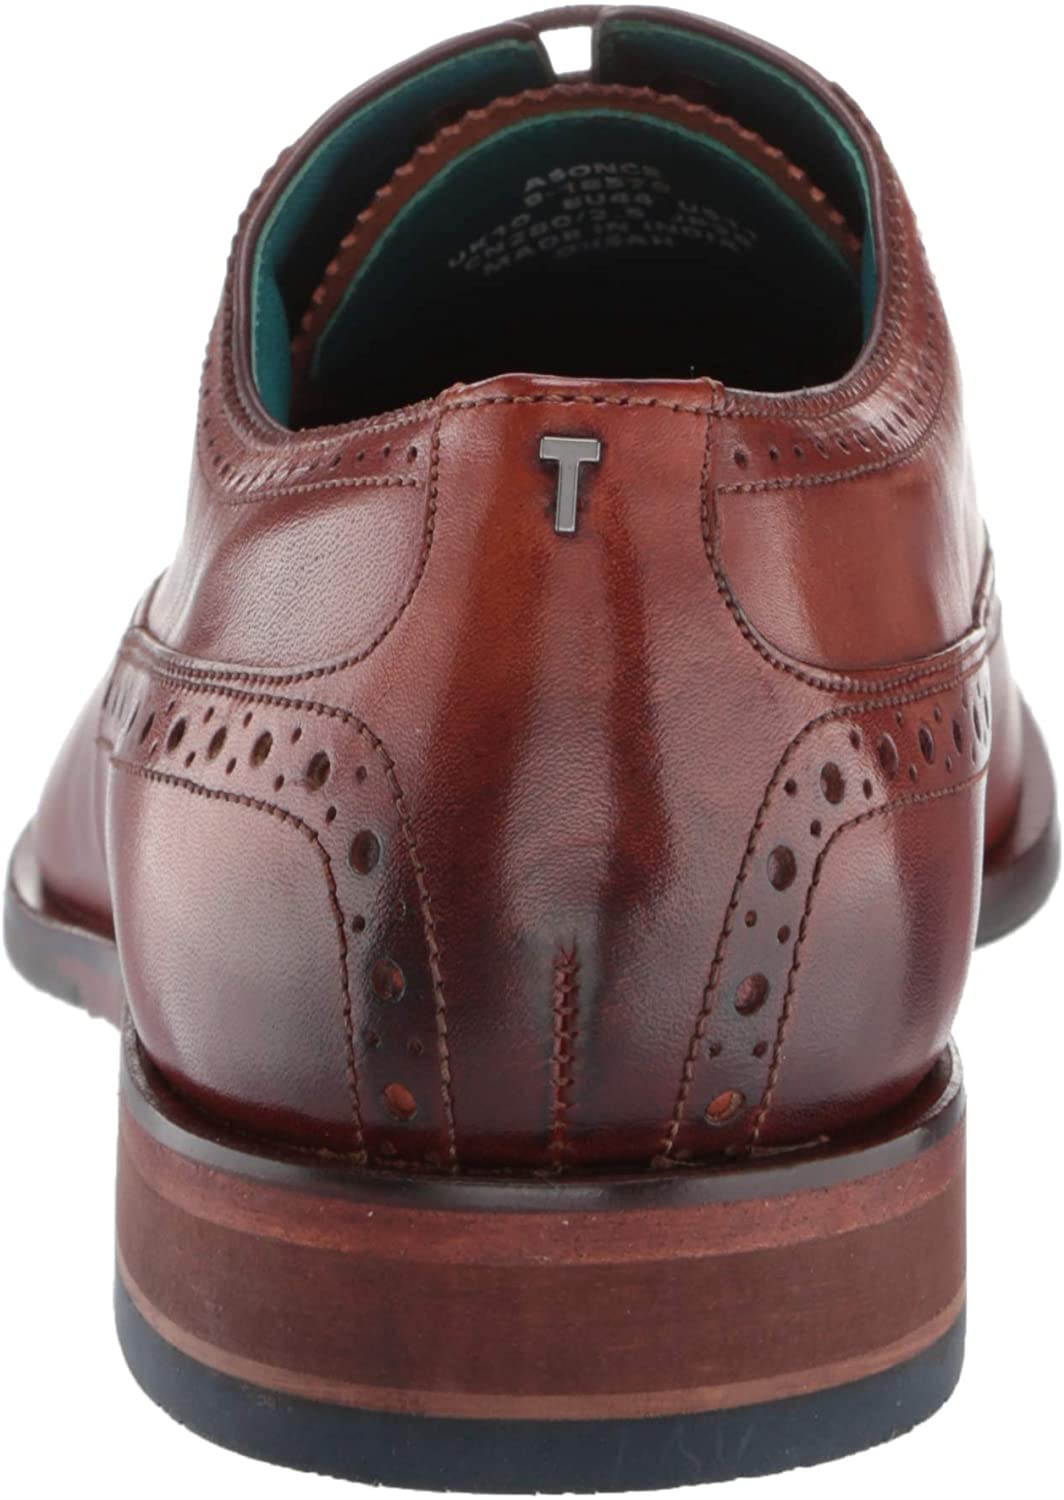 woocommerce-673321-2209615.cloudwaysapps.com-ted-baker-mens-brown-leather-asonce-oxford-shoes